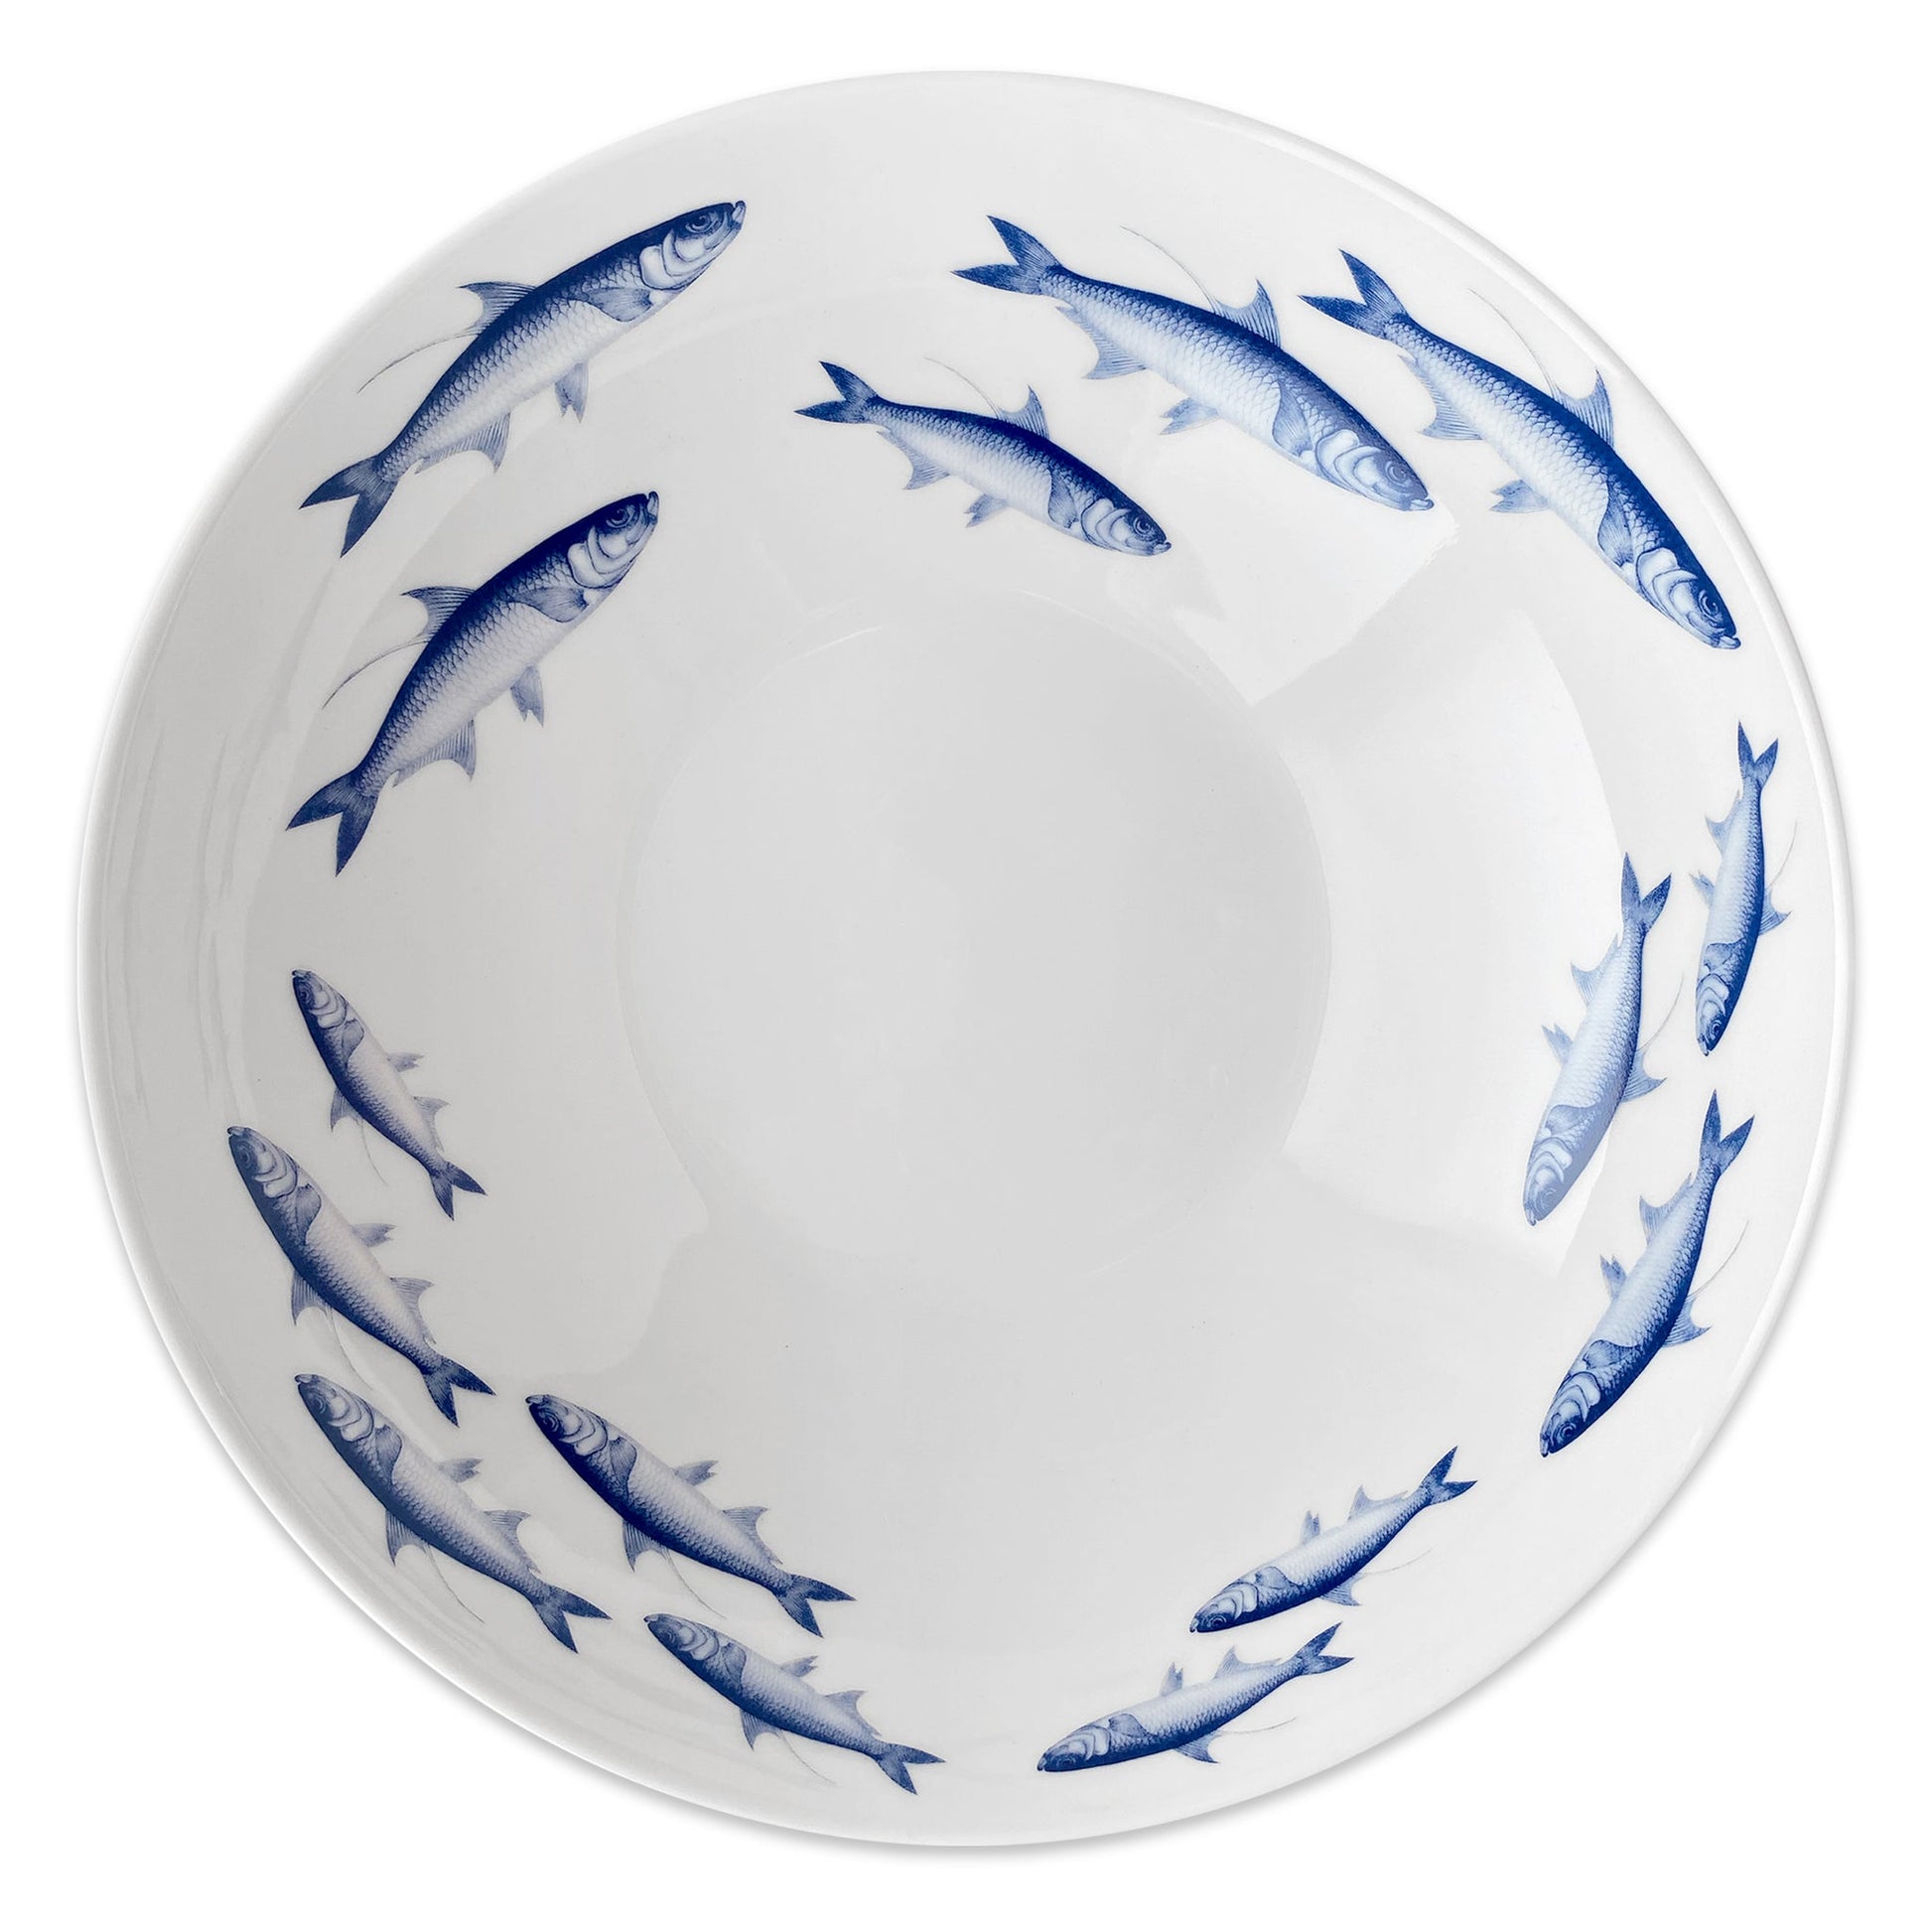 School of Fish Wide Serving Bowl-Nautical Decor and Gifts